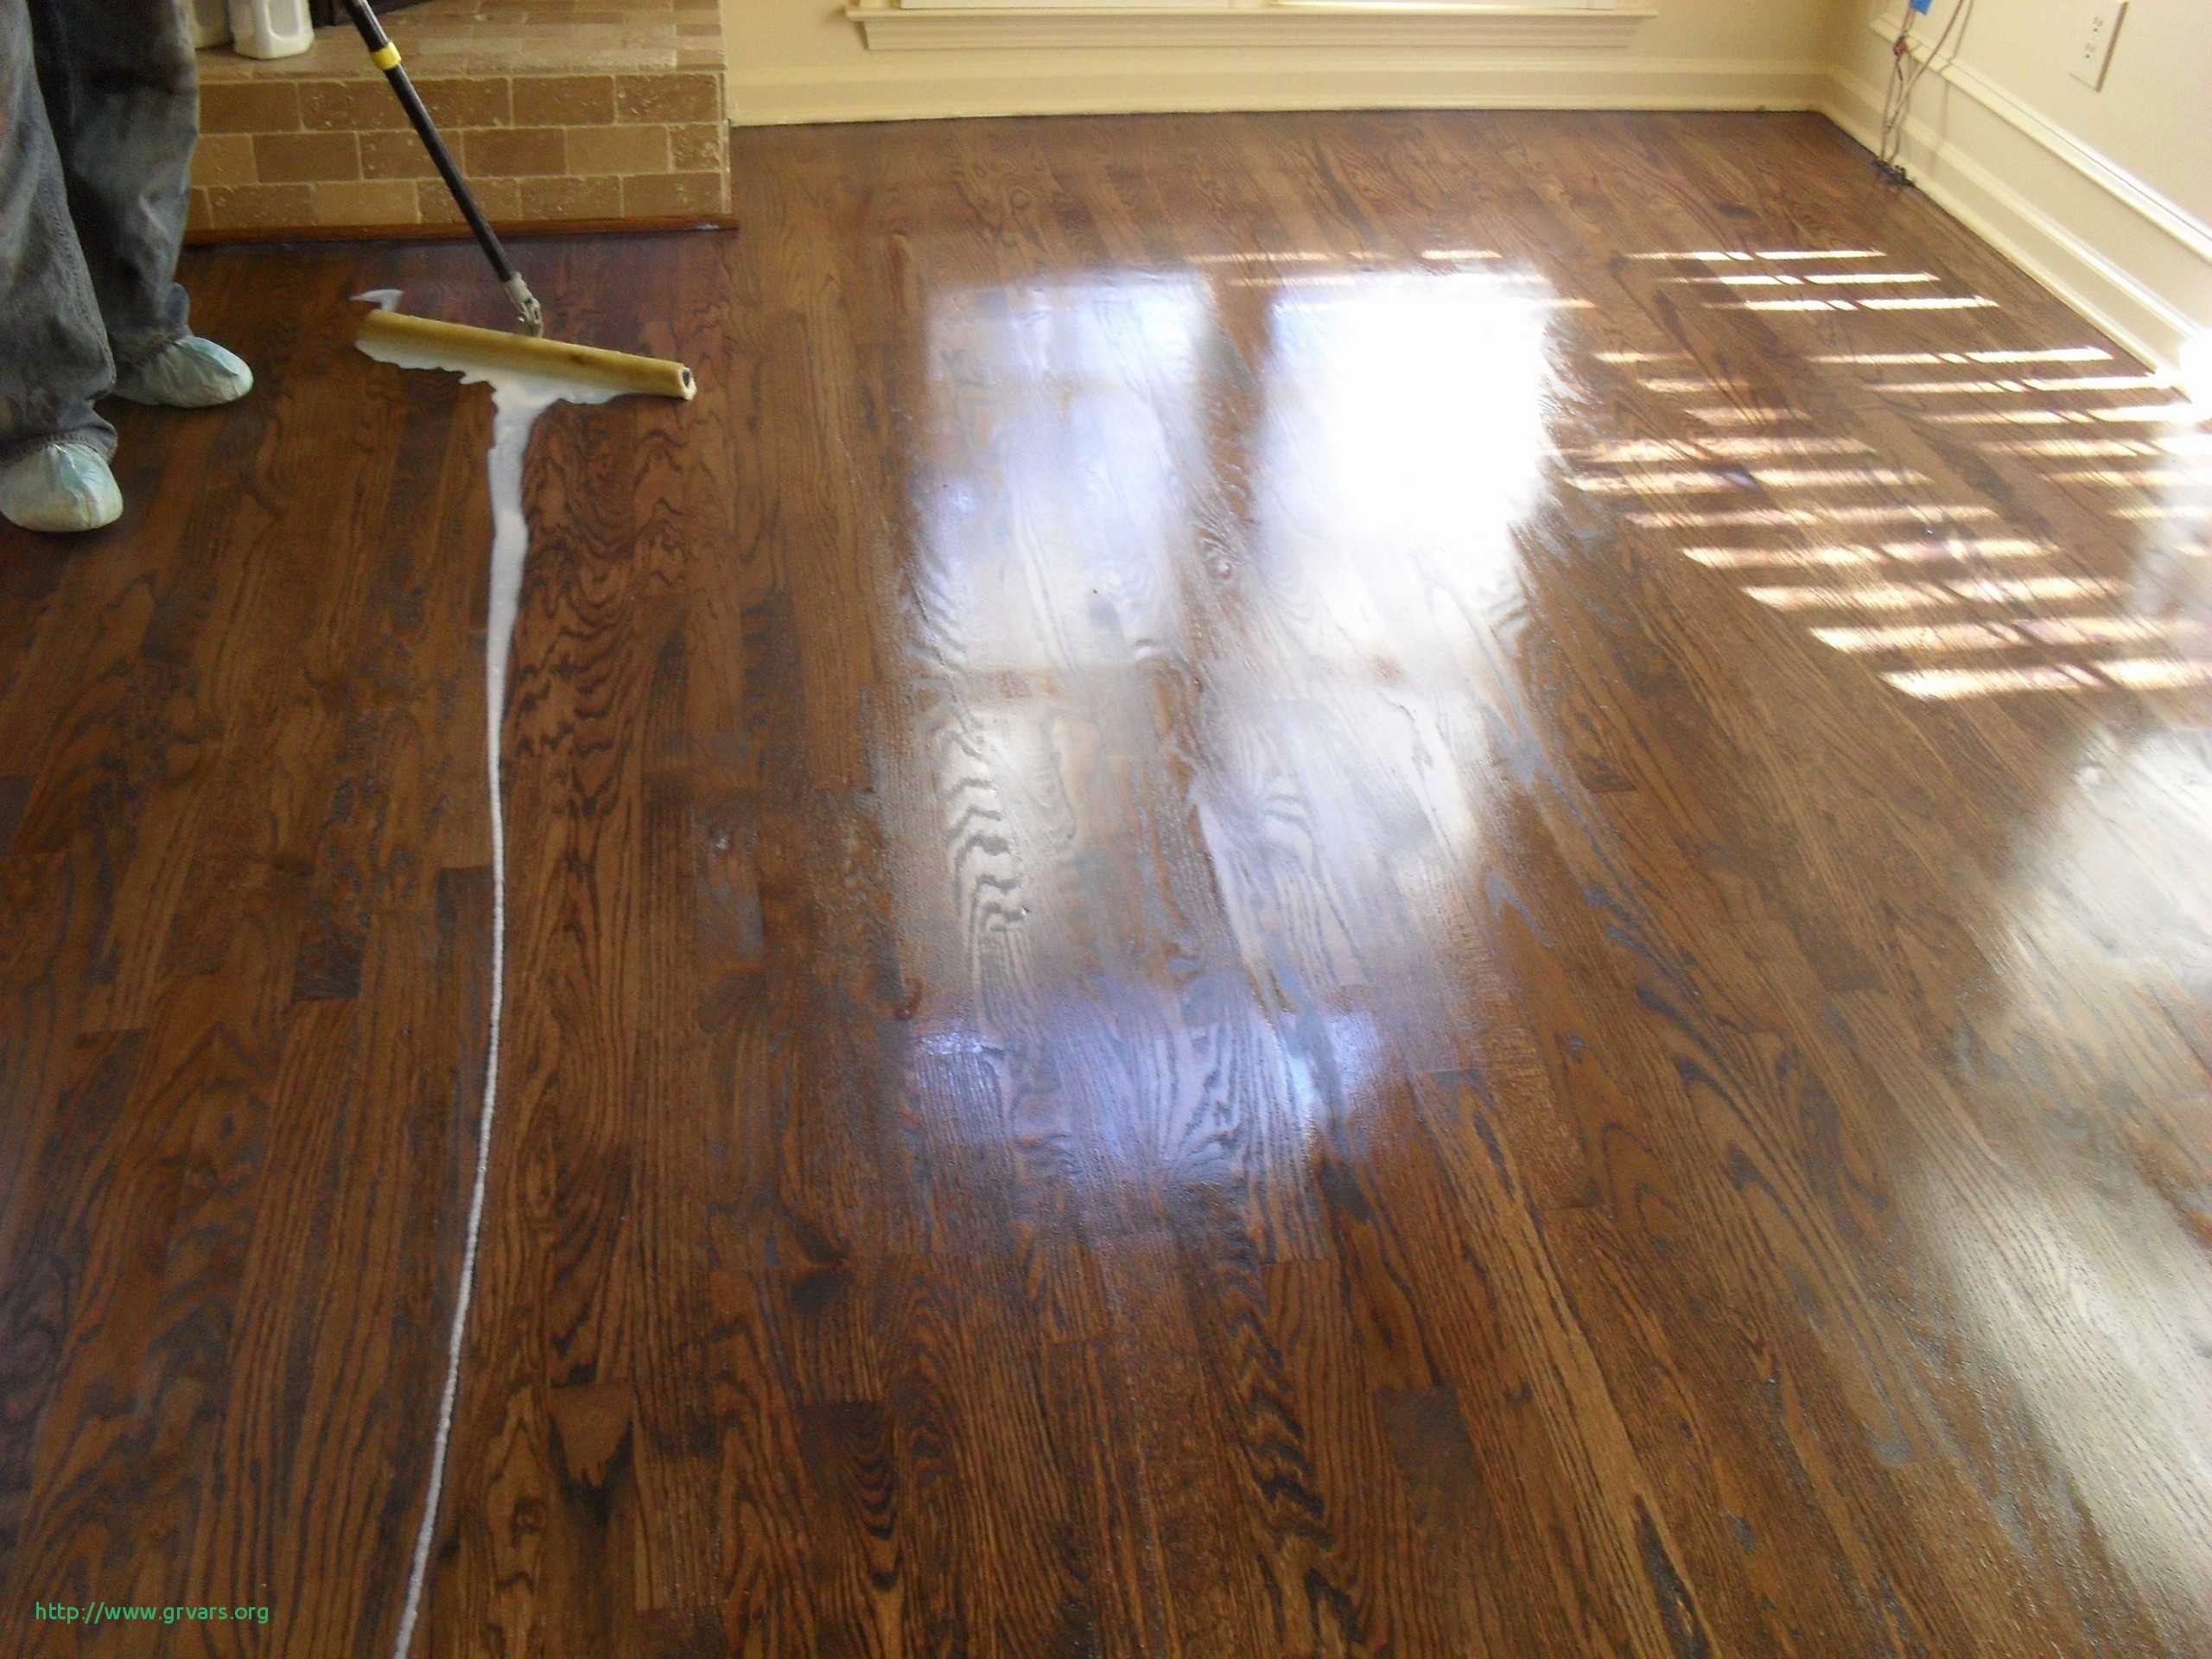 21 Wonderful Hardwood Floor Refinishing Nj Costs 2024 free download hardwood floor refinishing nj costs of how much does it cost to have hardwood floors refinished nouveau with regard to how much does it cost to have hardwood floors refinished nouveau cost t